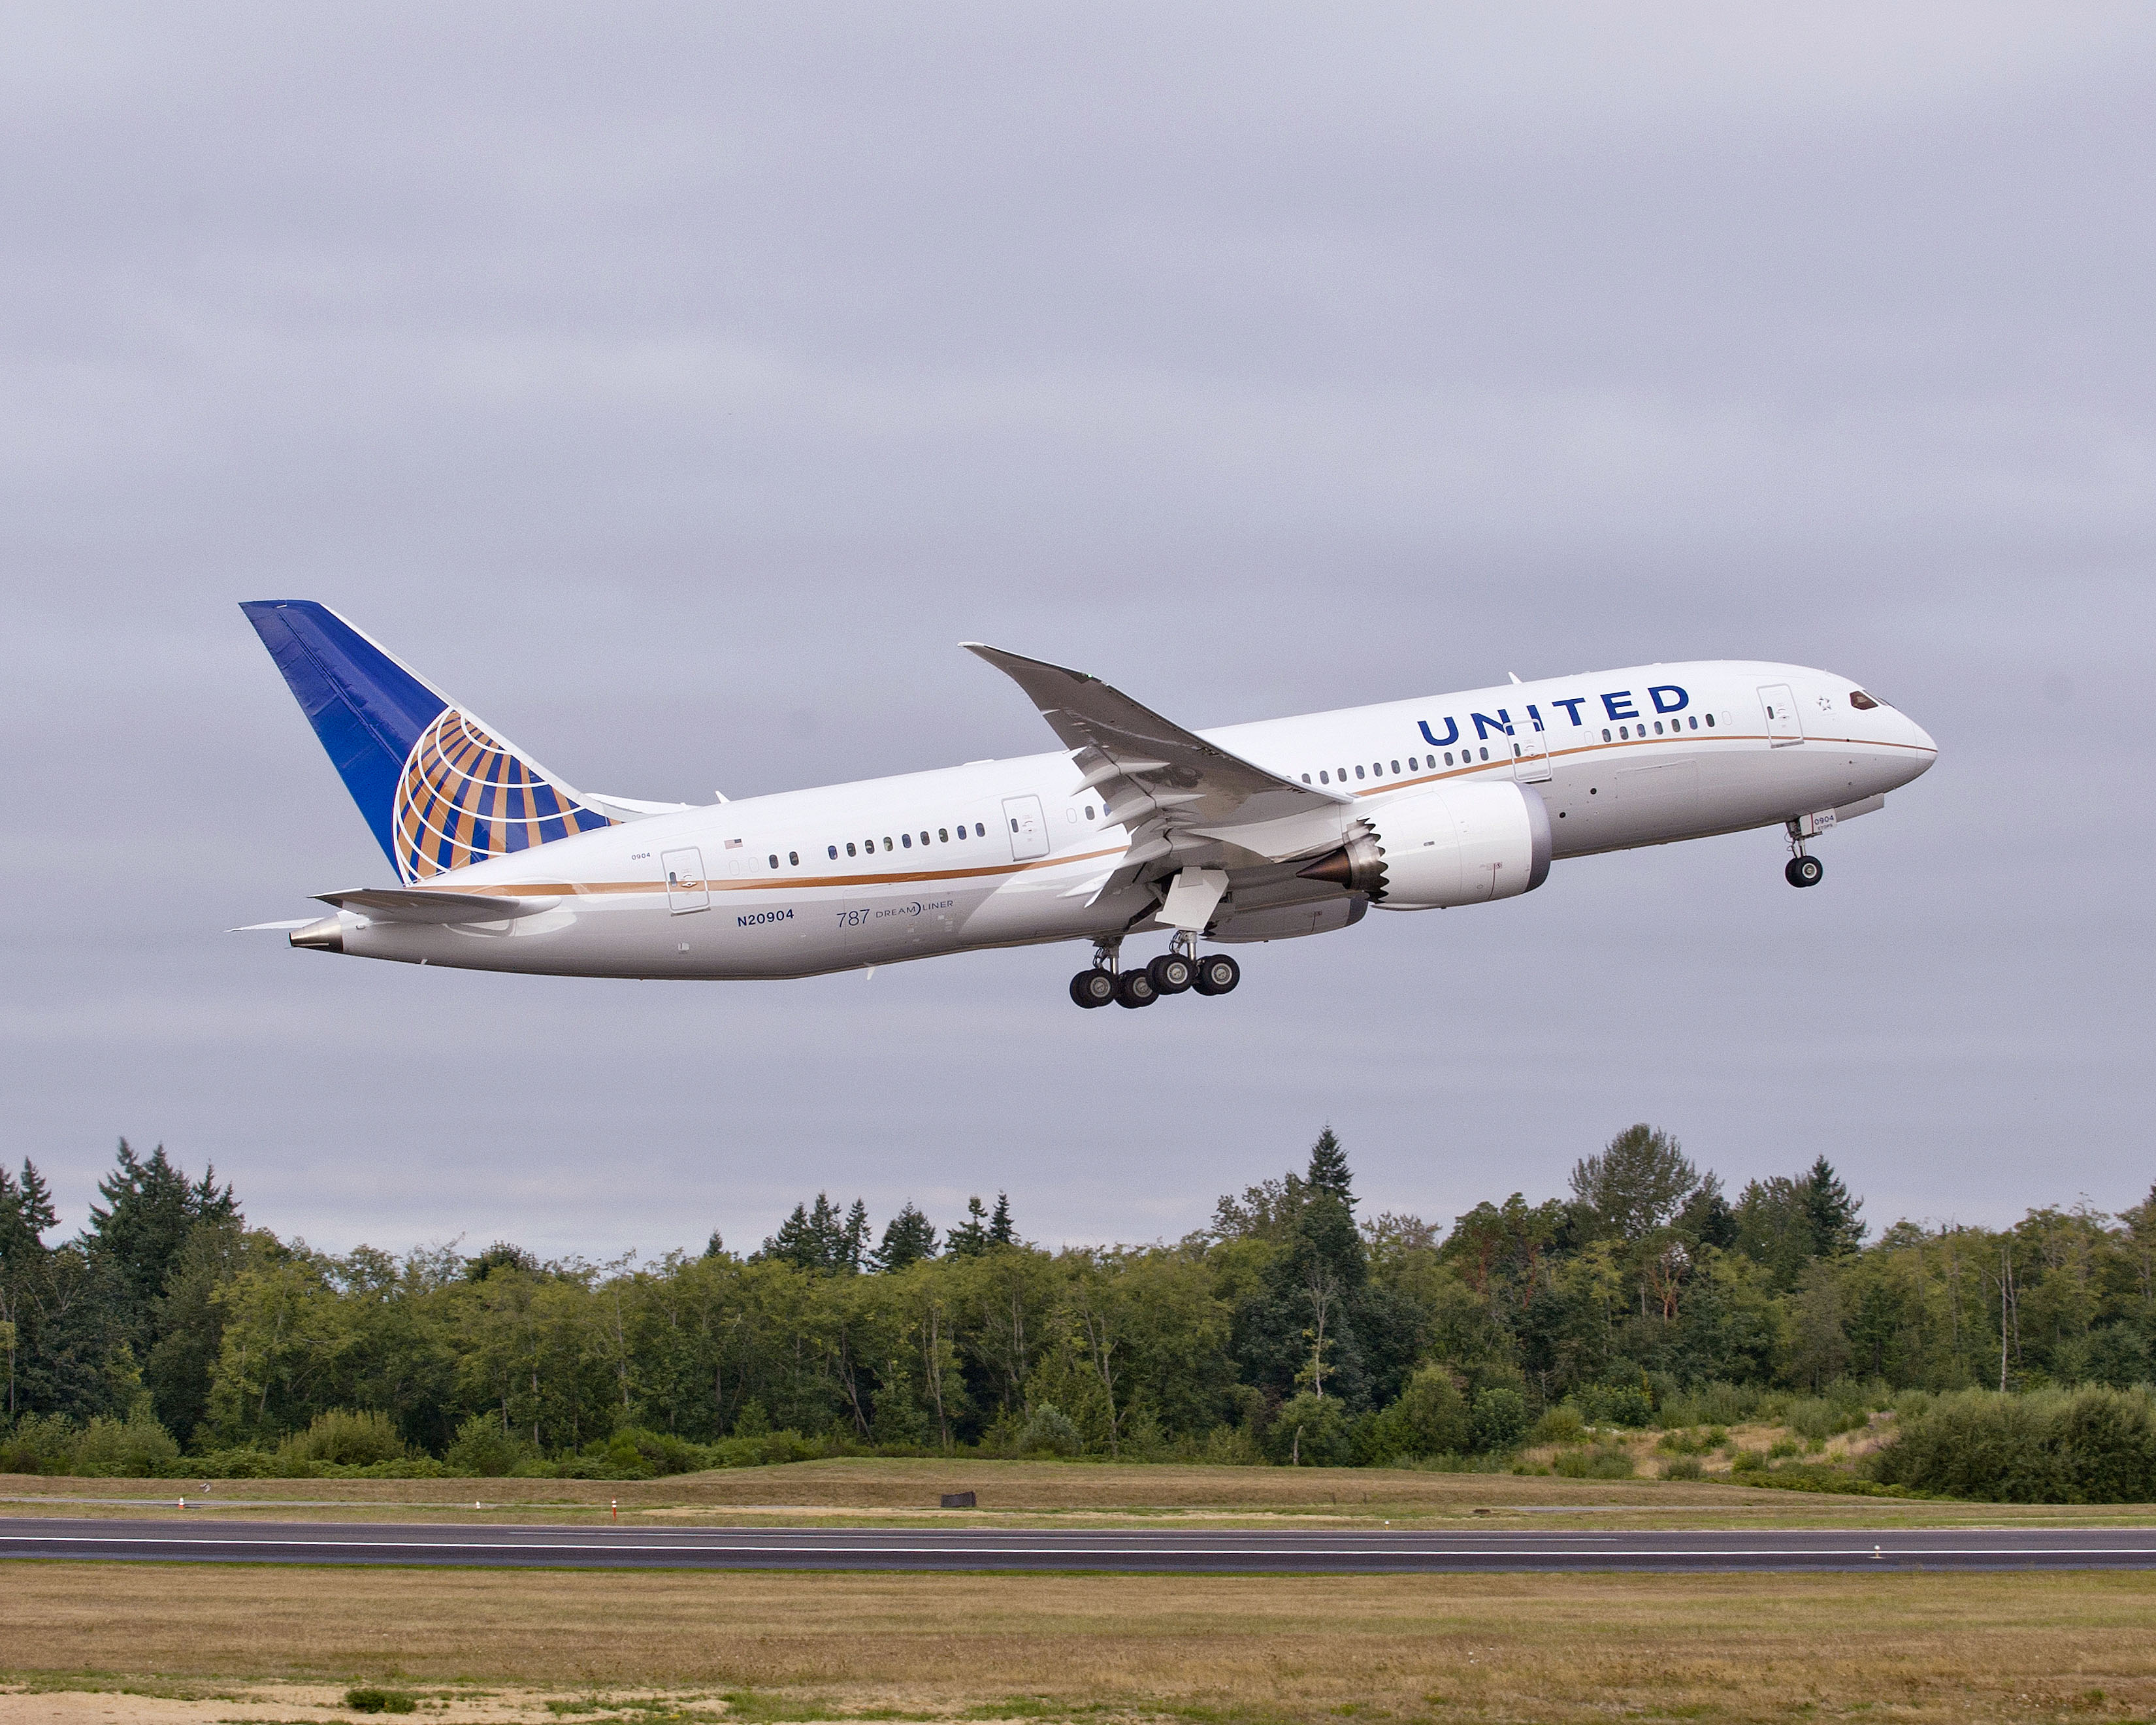 United’s first Boeing 787 Dreamliner takes off from Paine Field in Everett, Wash.